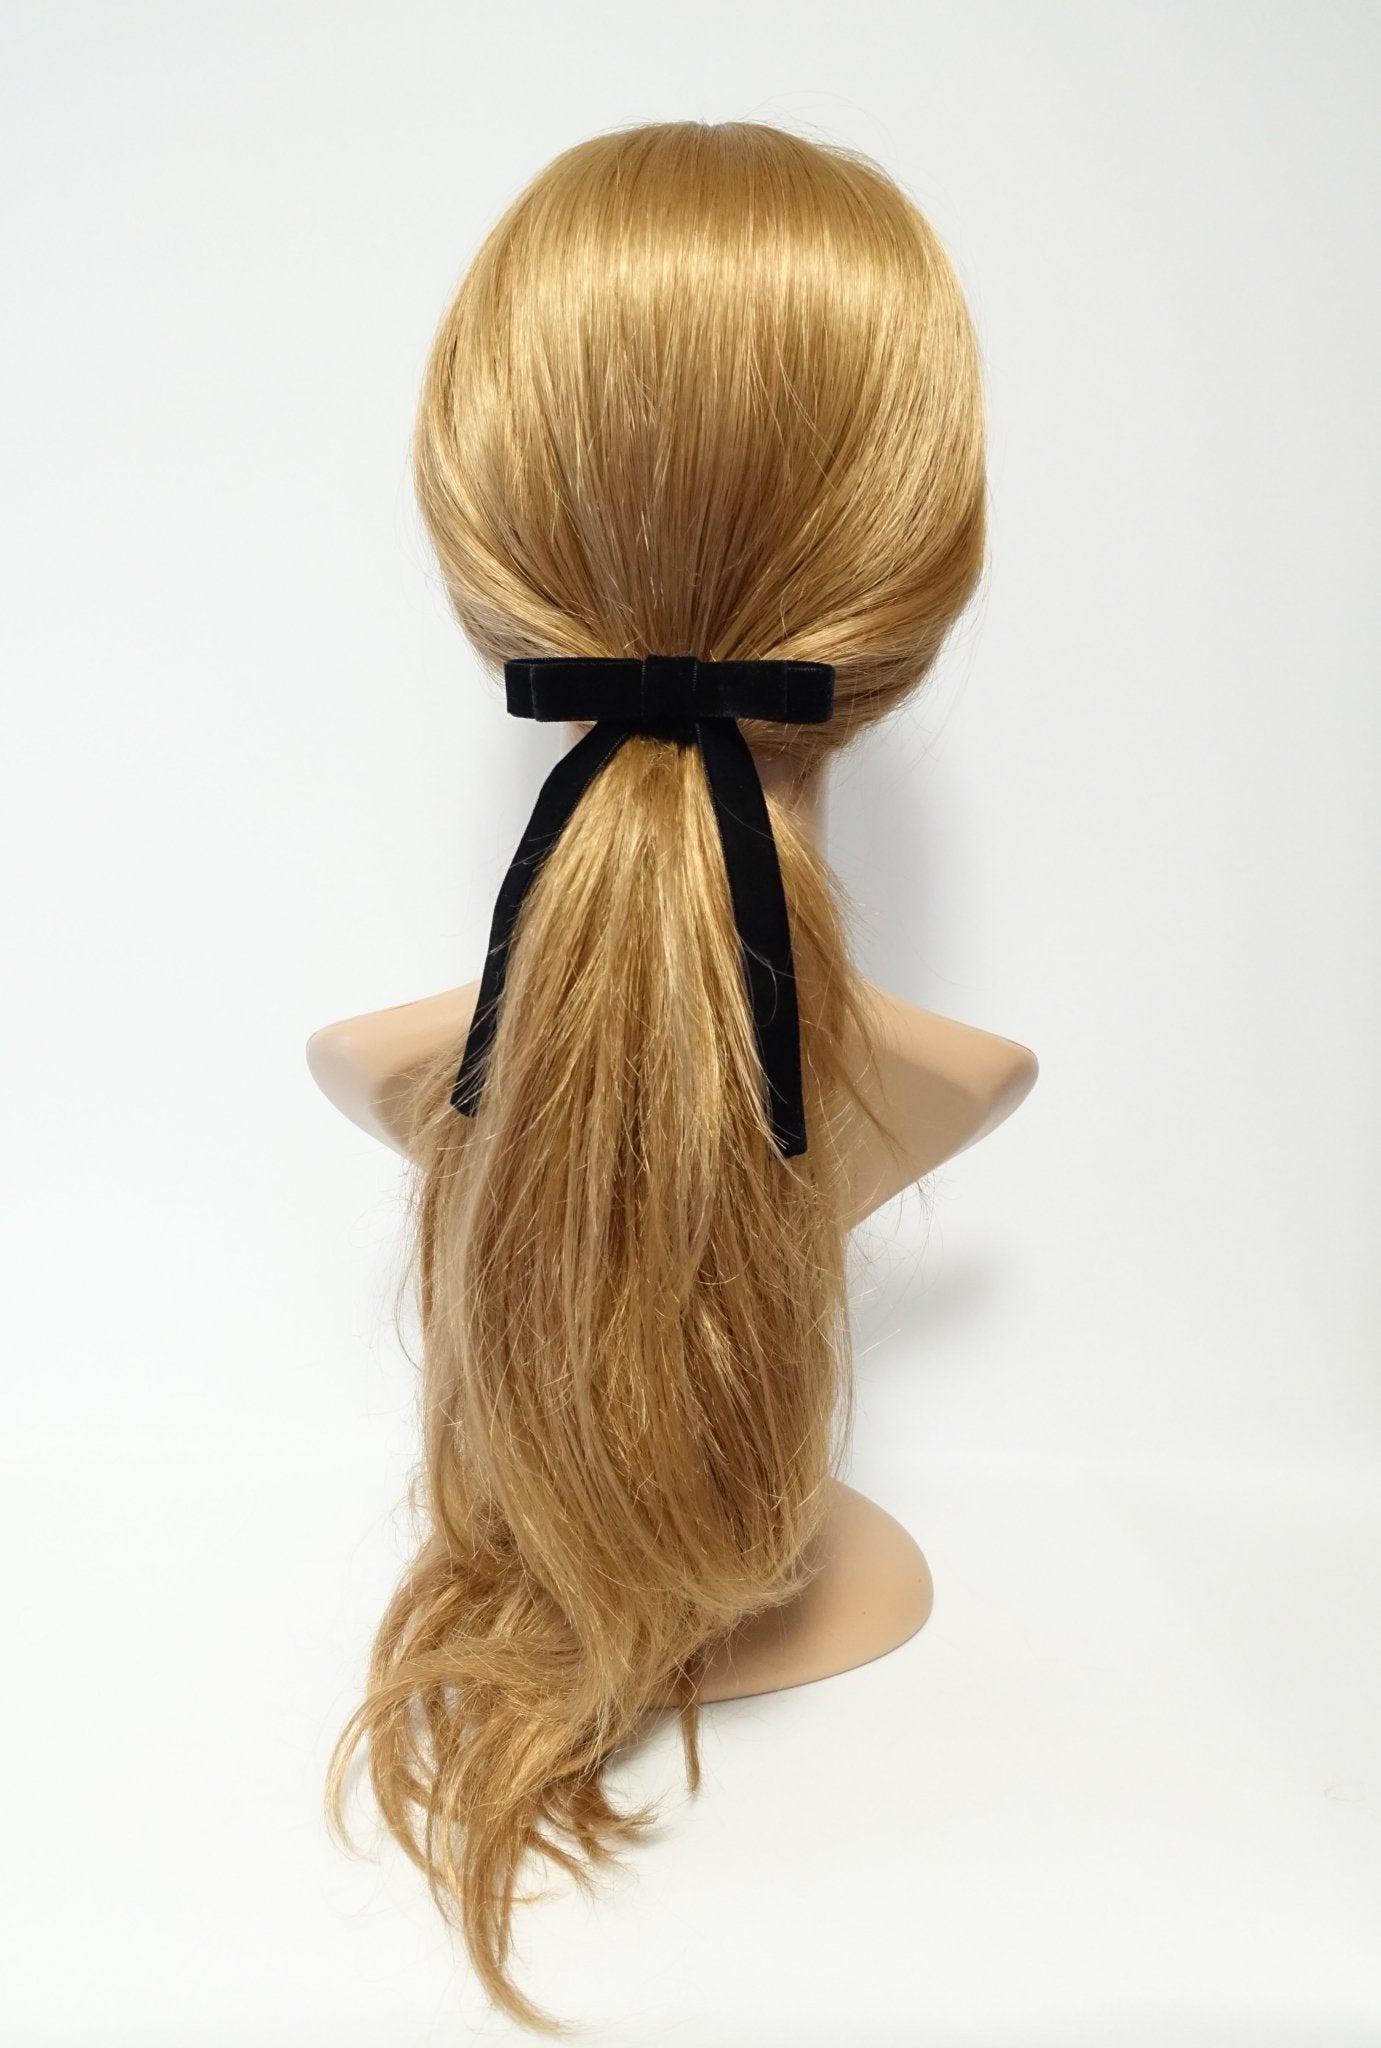 VeryShine Cellulose Acetate Tail Bow Knot Hair Tie Elastic Ponytail Holder Mocca